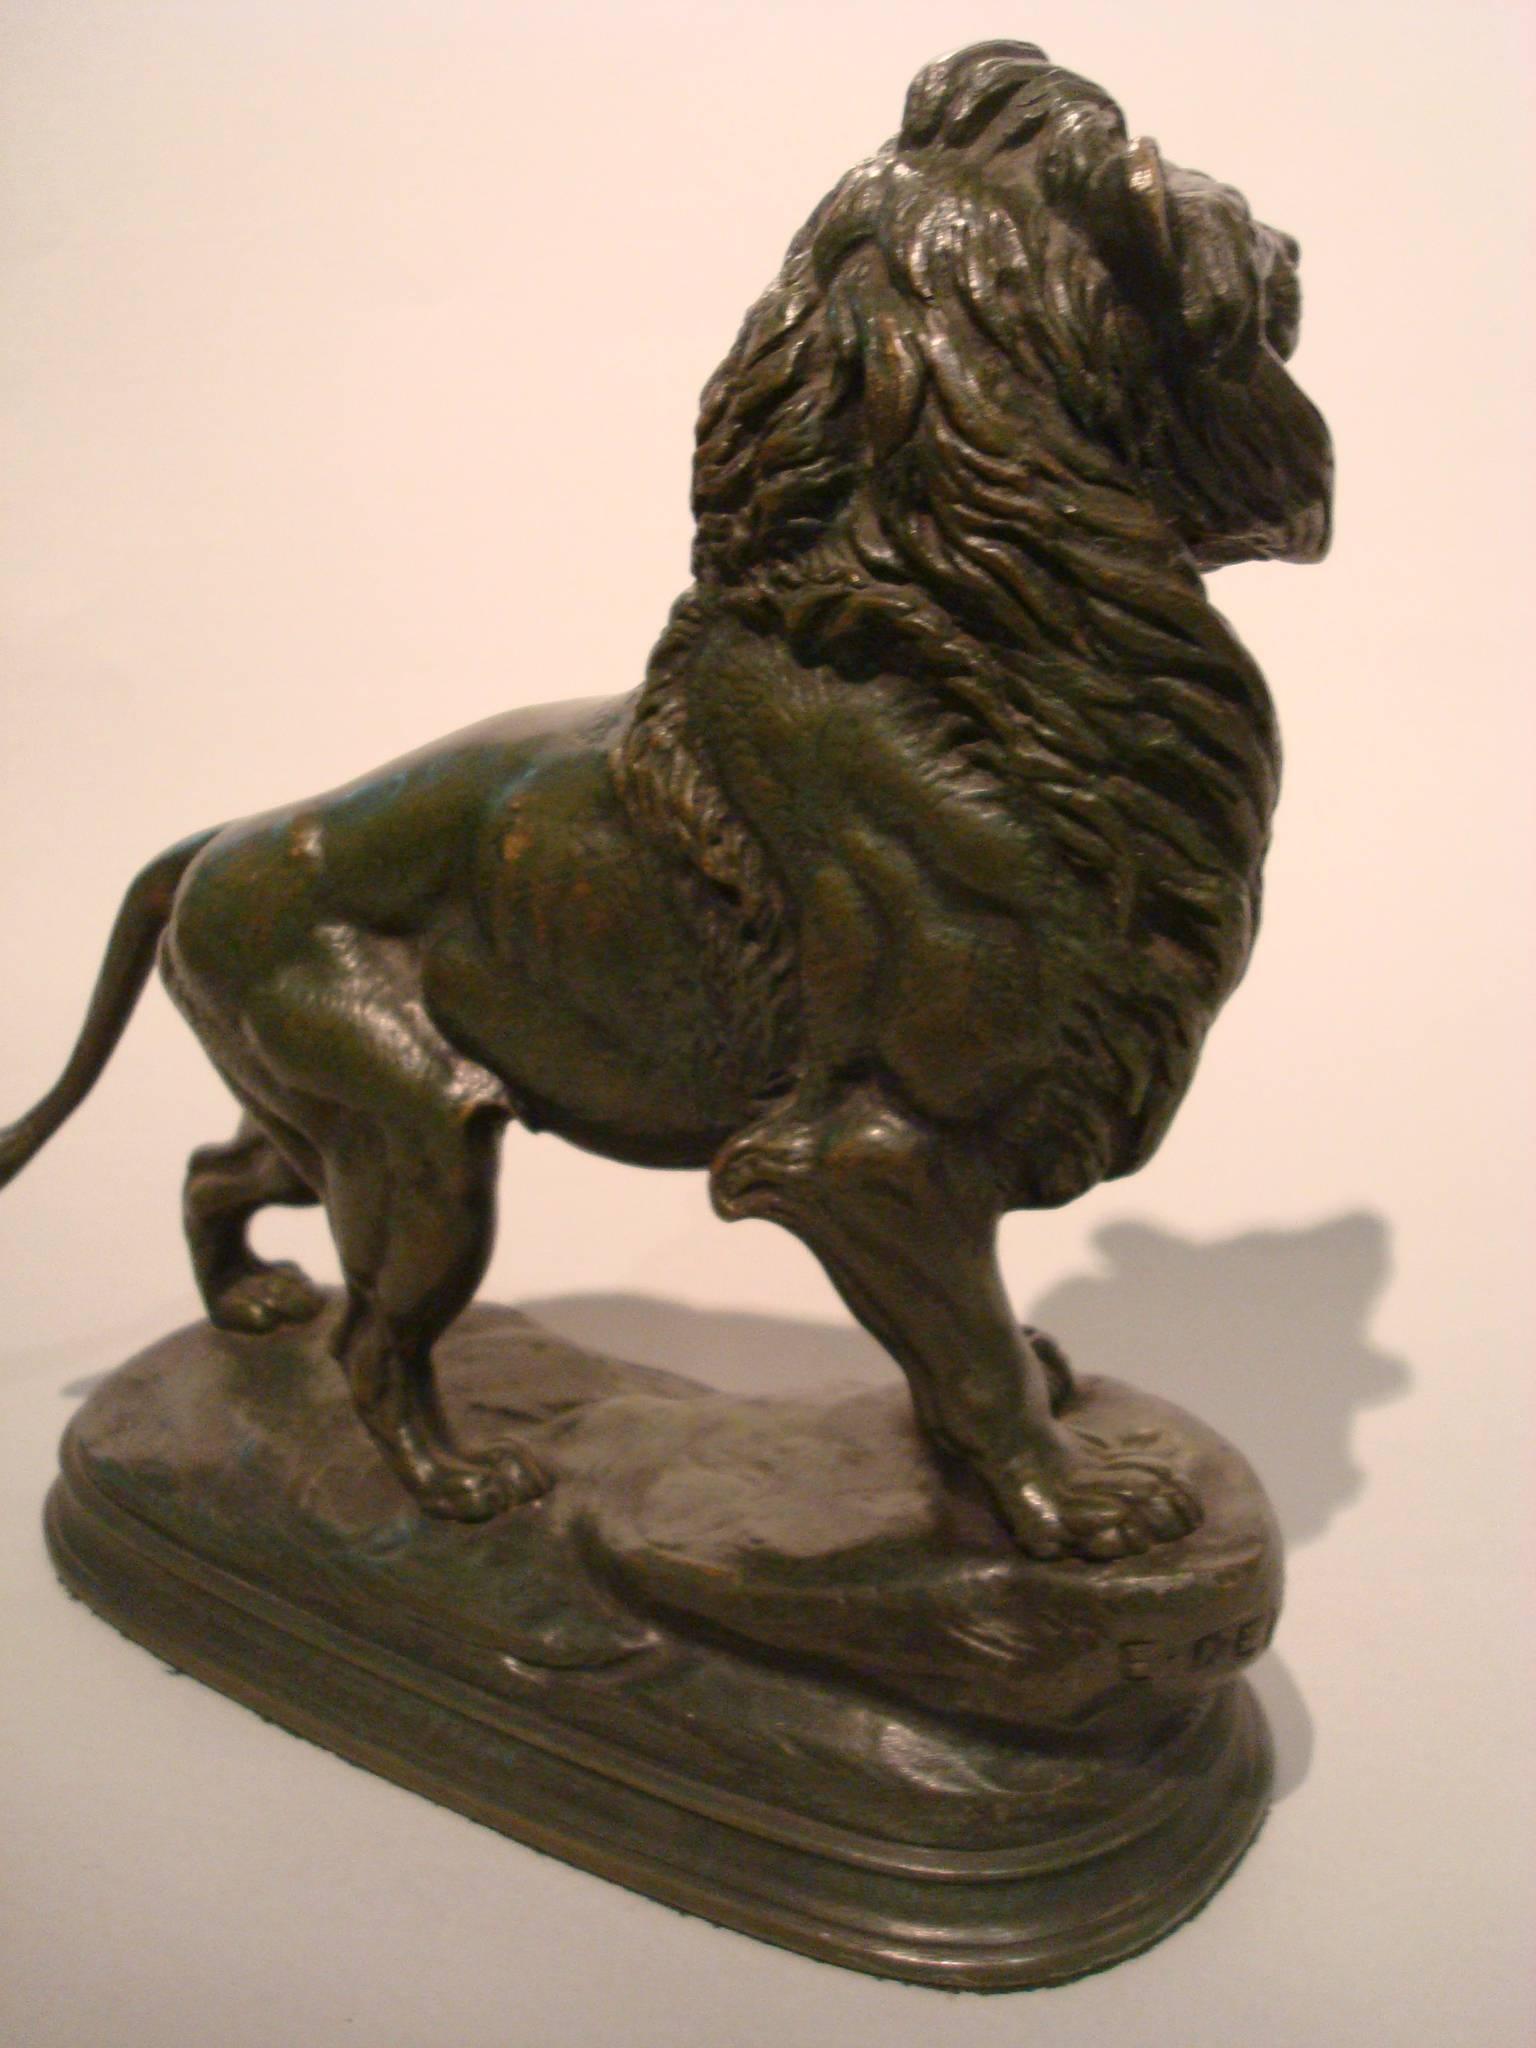 A superb 19th century French animalier sculpture of a roaring Lion standing on a rocky outcrop, finely modelled with good dark green patination signed E. Delabrierre.
This model was exhibited at the Paris Salon in 1866.
Paul Édouard Delabrierre